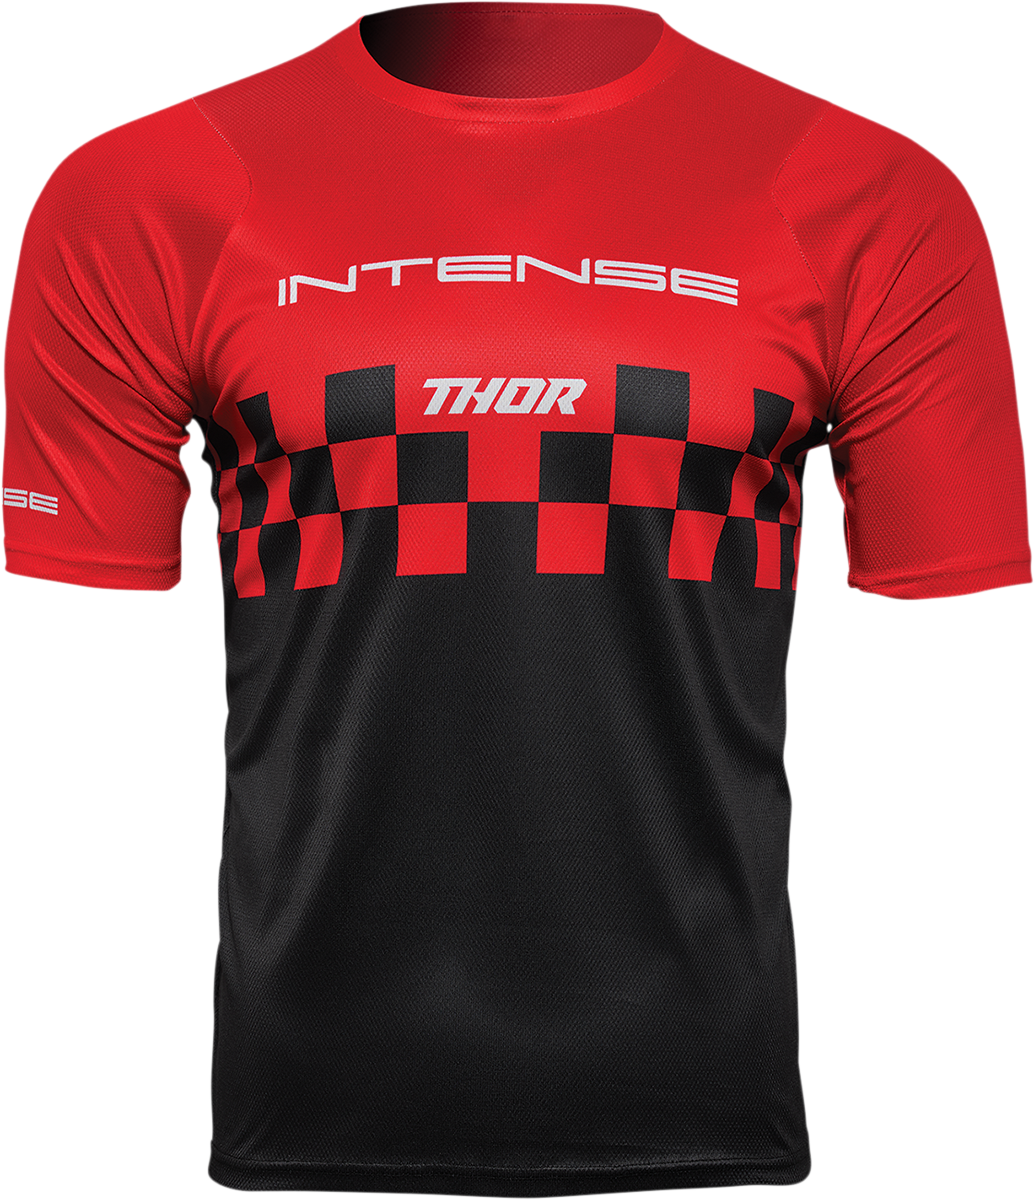 THOR Intense Chex Jersey - Red/Black - XS 5120-0138